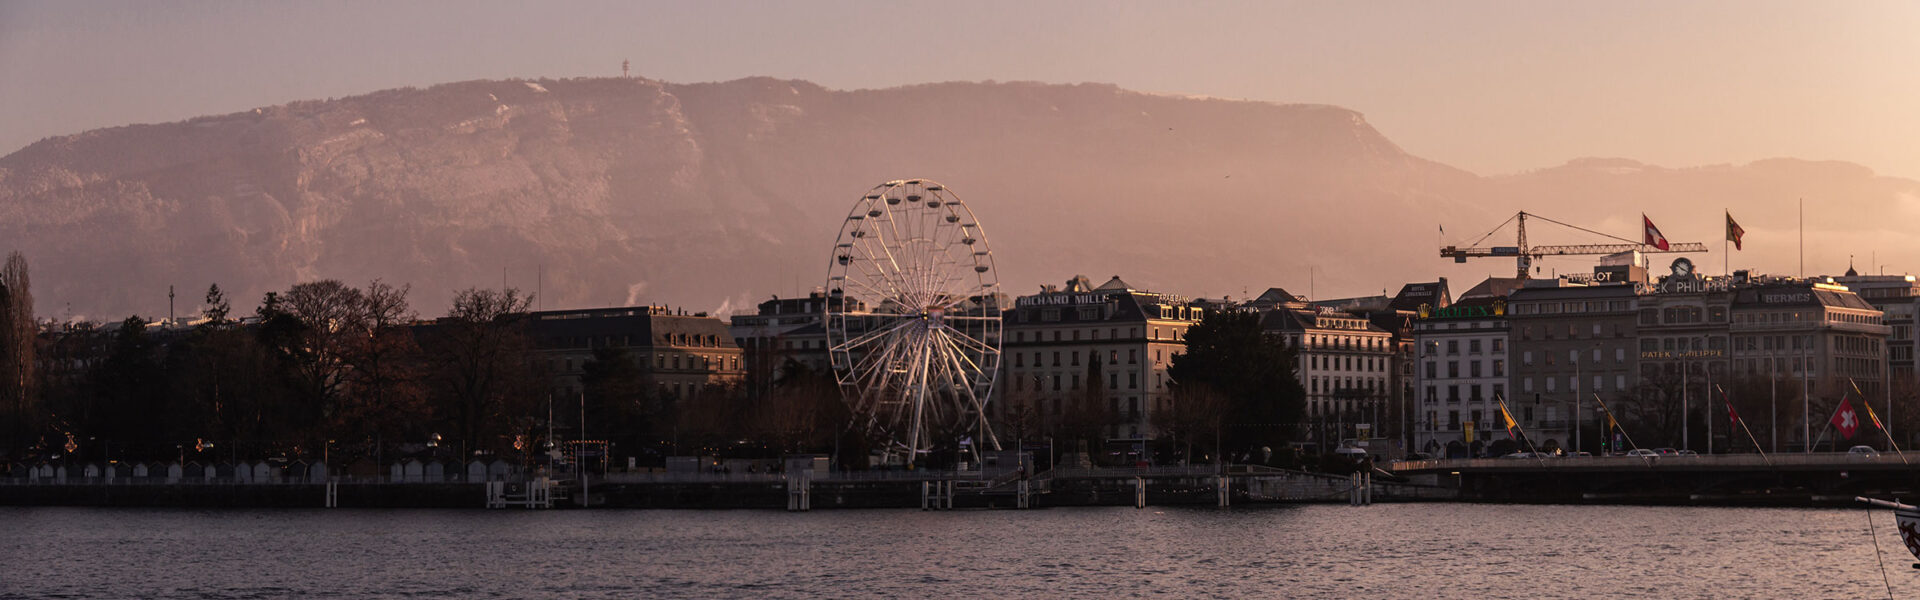 The shoreline in Geneva with a view of a ferris wheel, the city & mountains in the background.